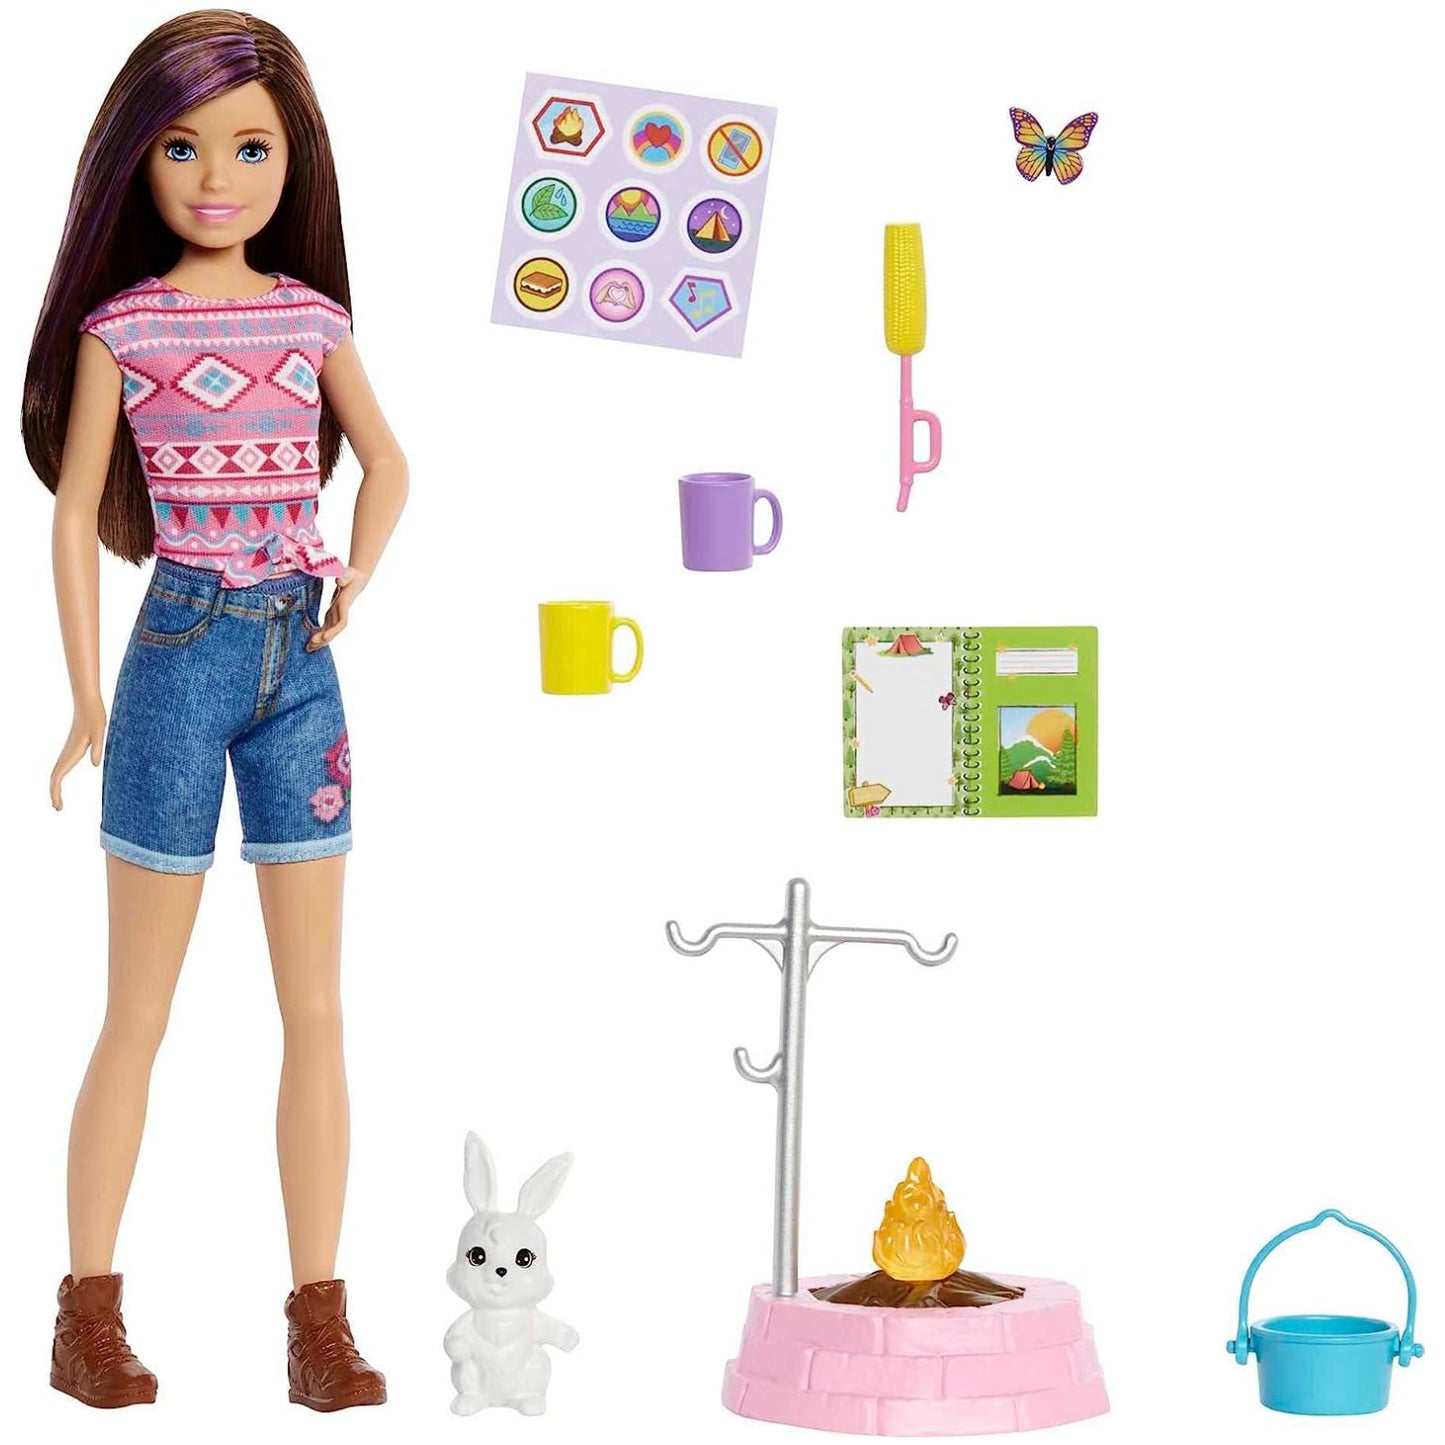 BARBIE Doll with Pet Bunny & Accessories 'It Takes Two' Skipper Camping (HDF71)